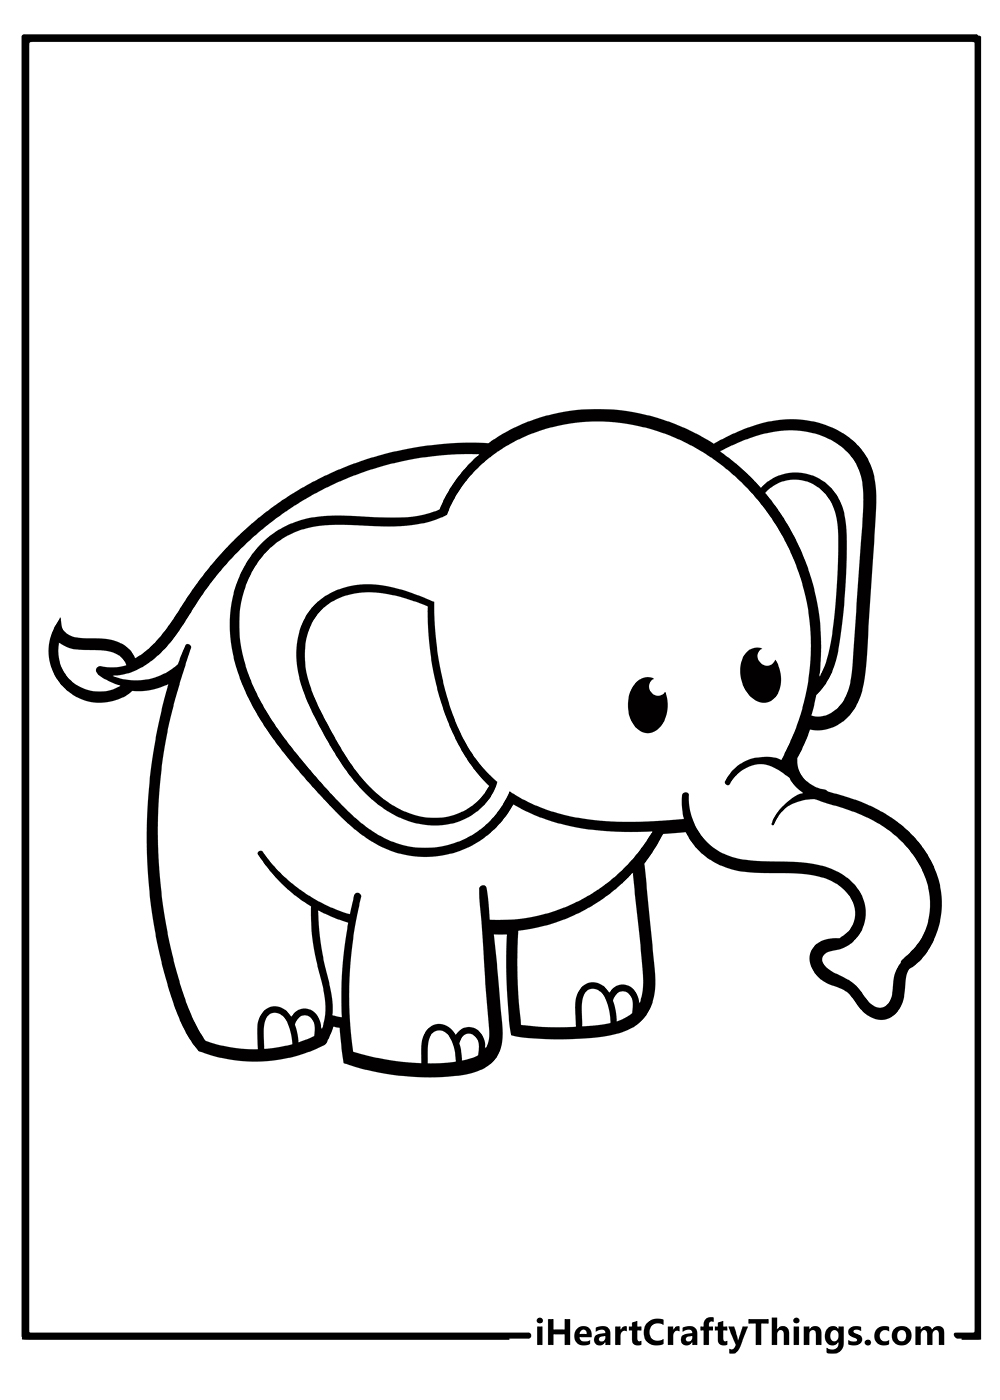 Elephant Coloring Book for kids free printable